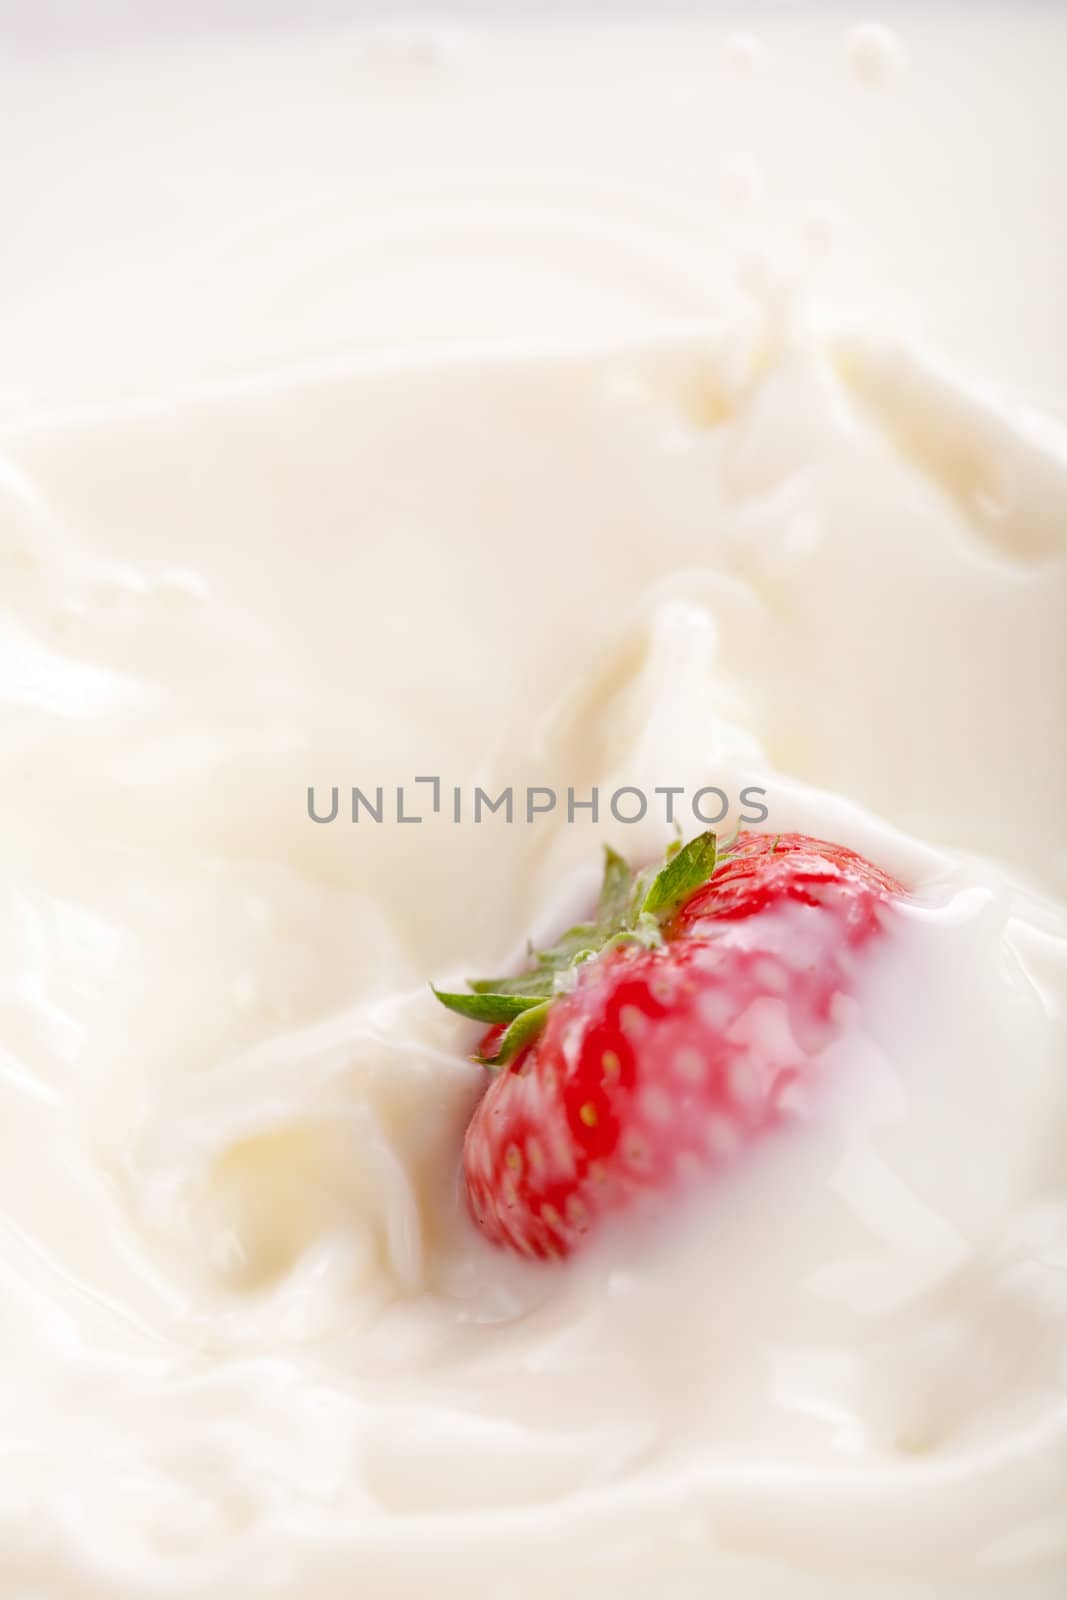 Strawberry in milk (some movement in strawberry due to falling)